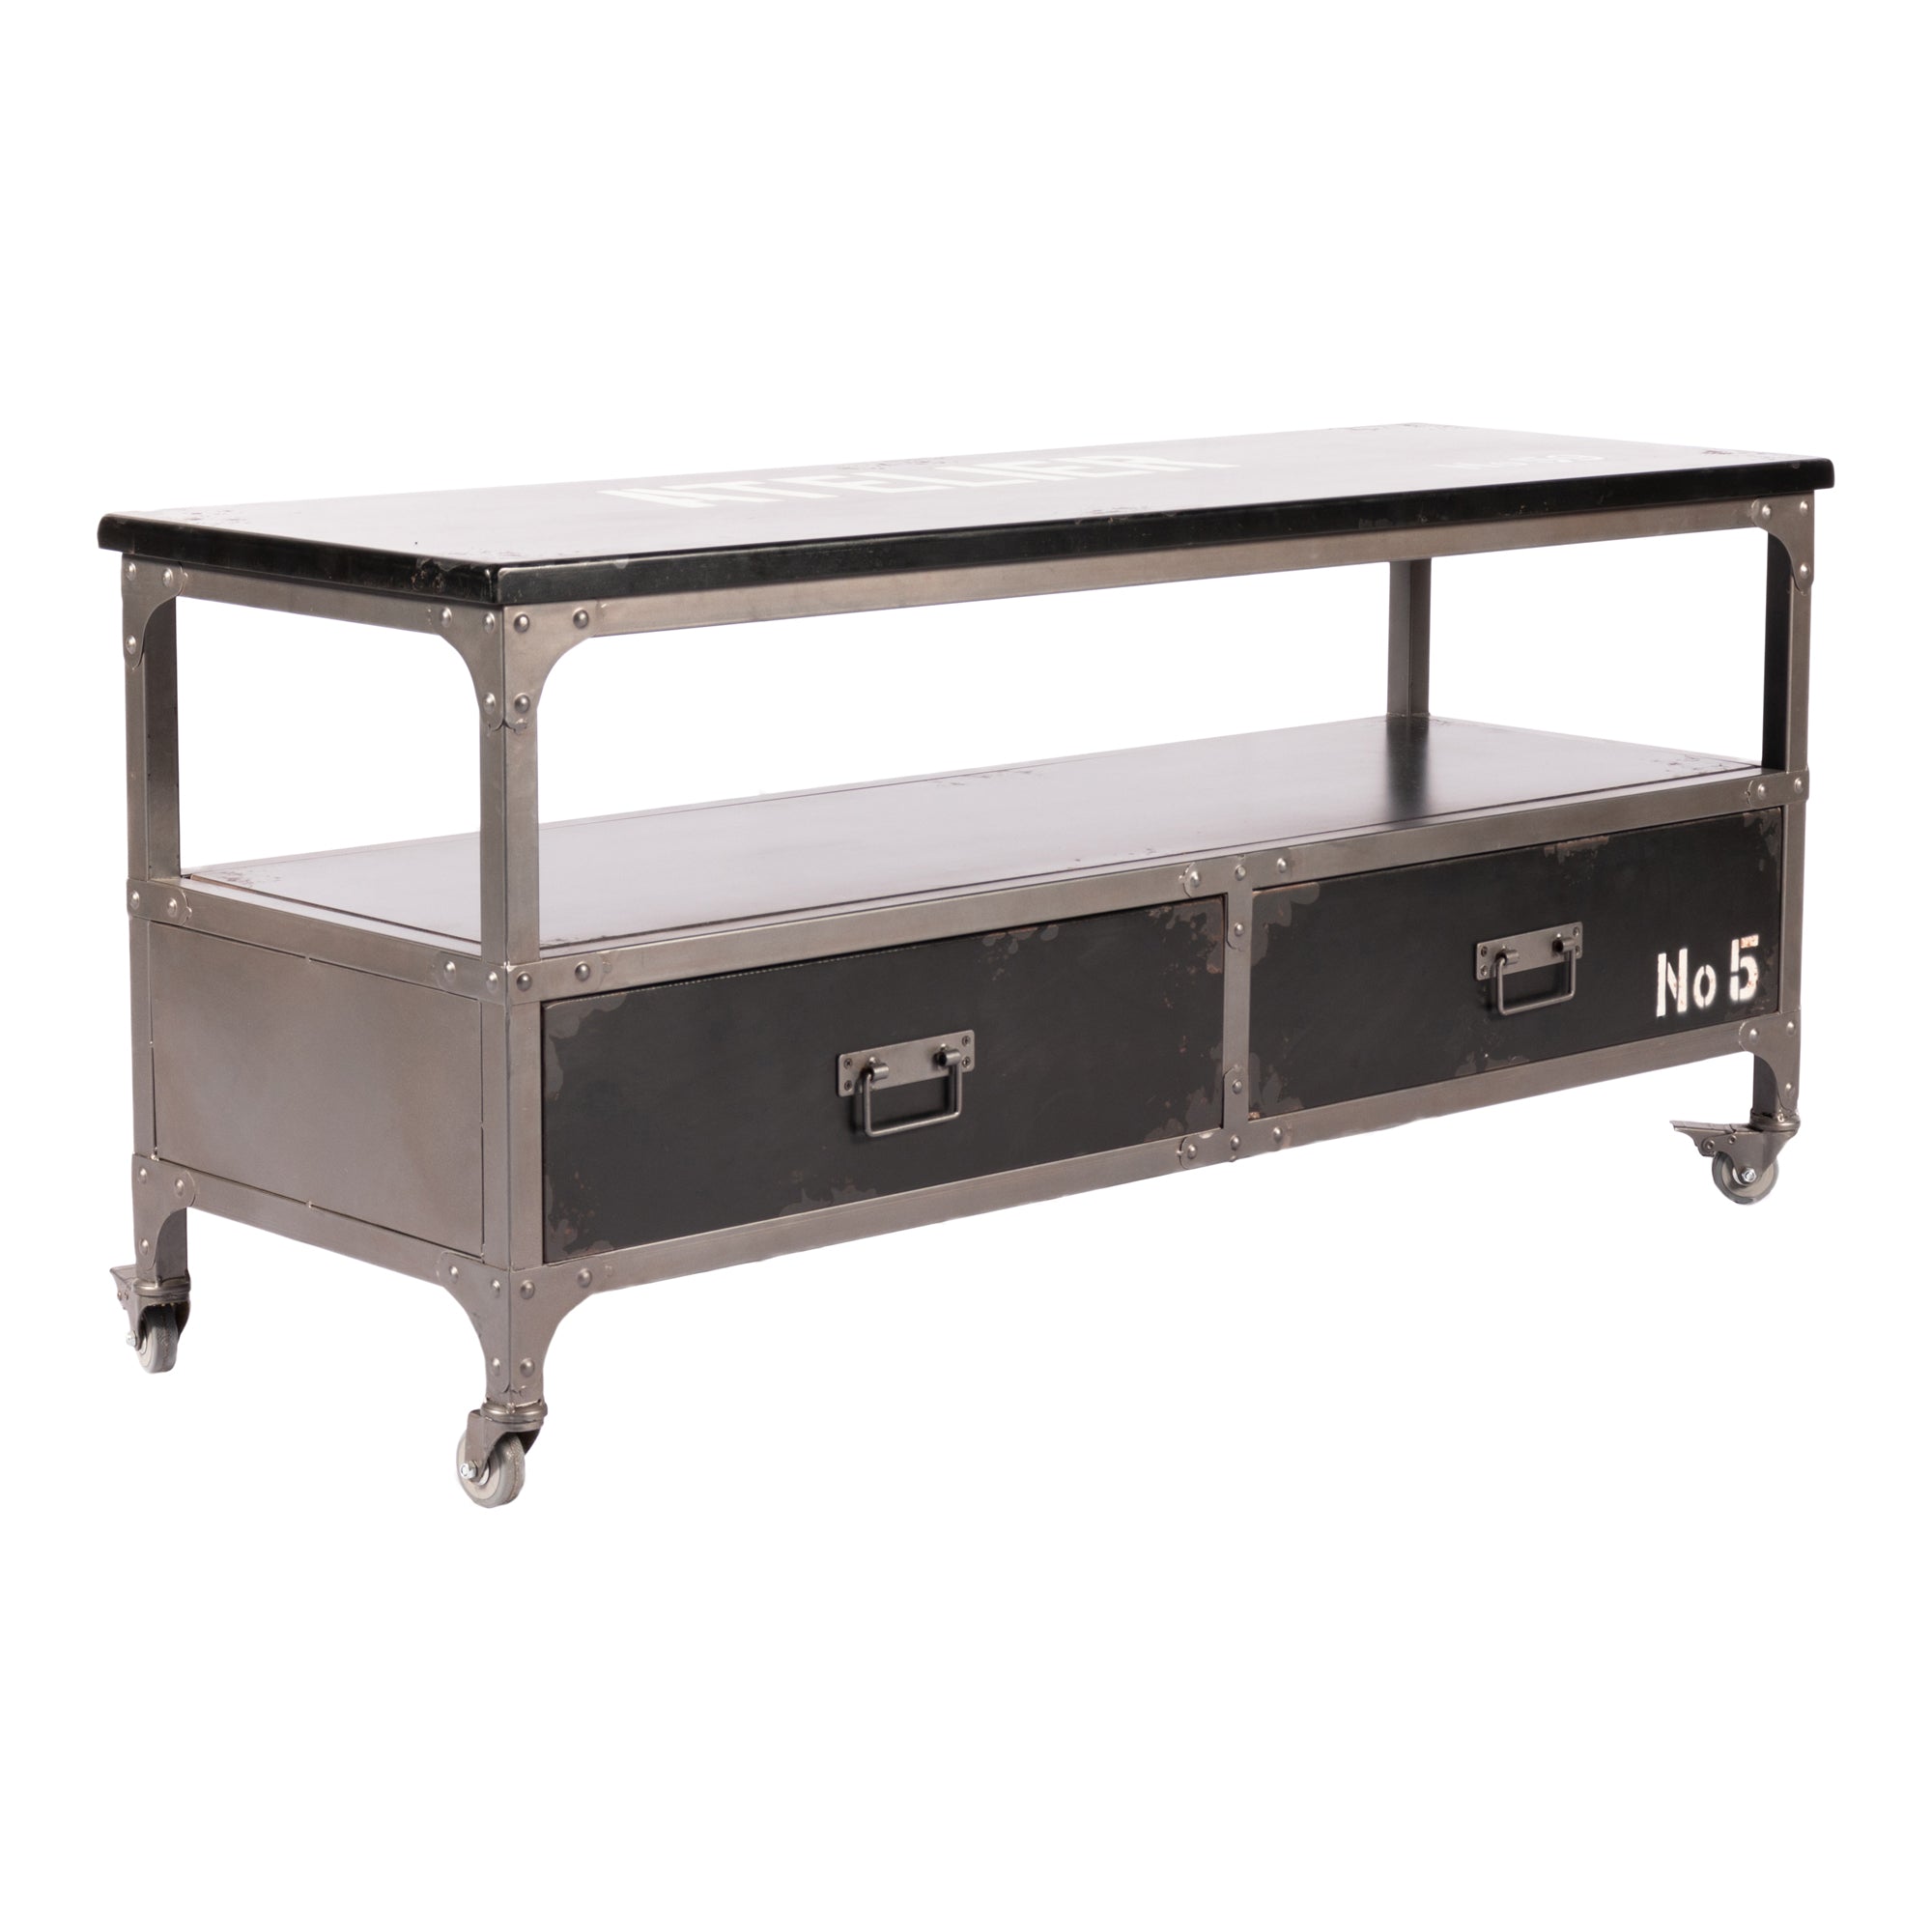 MOES-SOHO TV TABLE-TV Stands-MODTEMPO